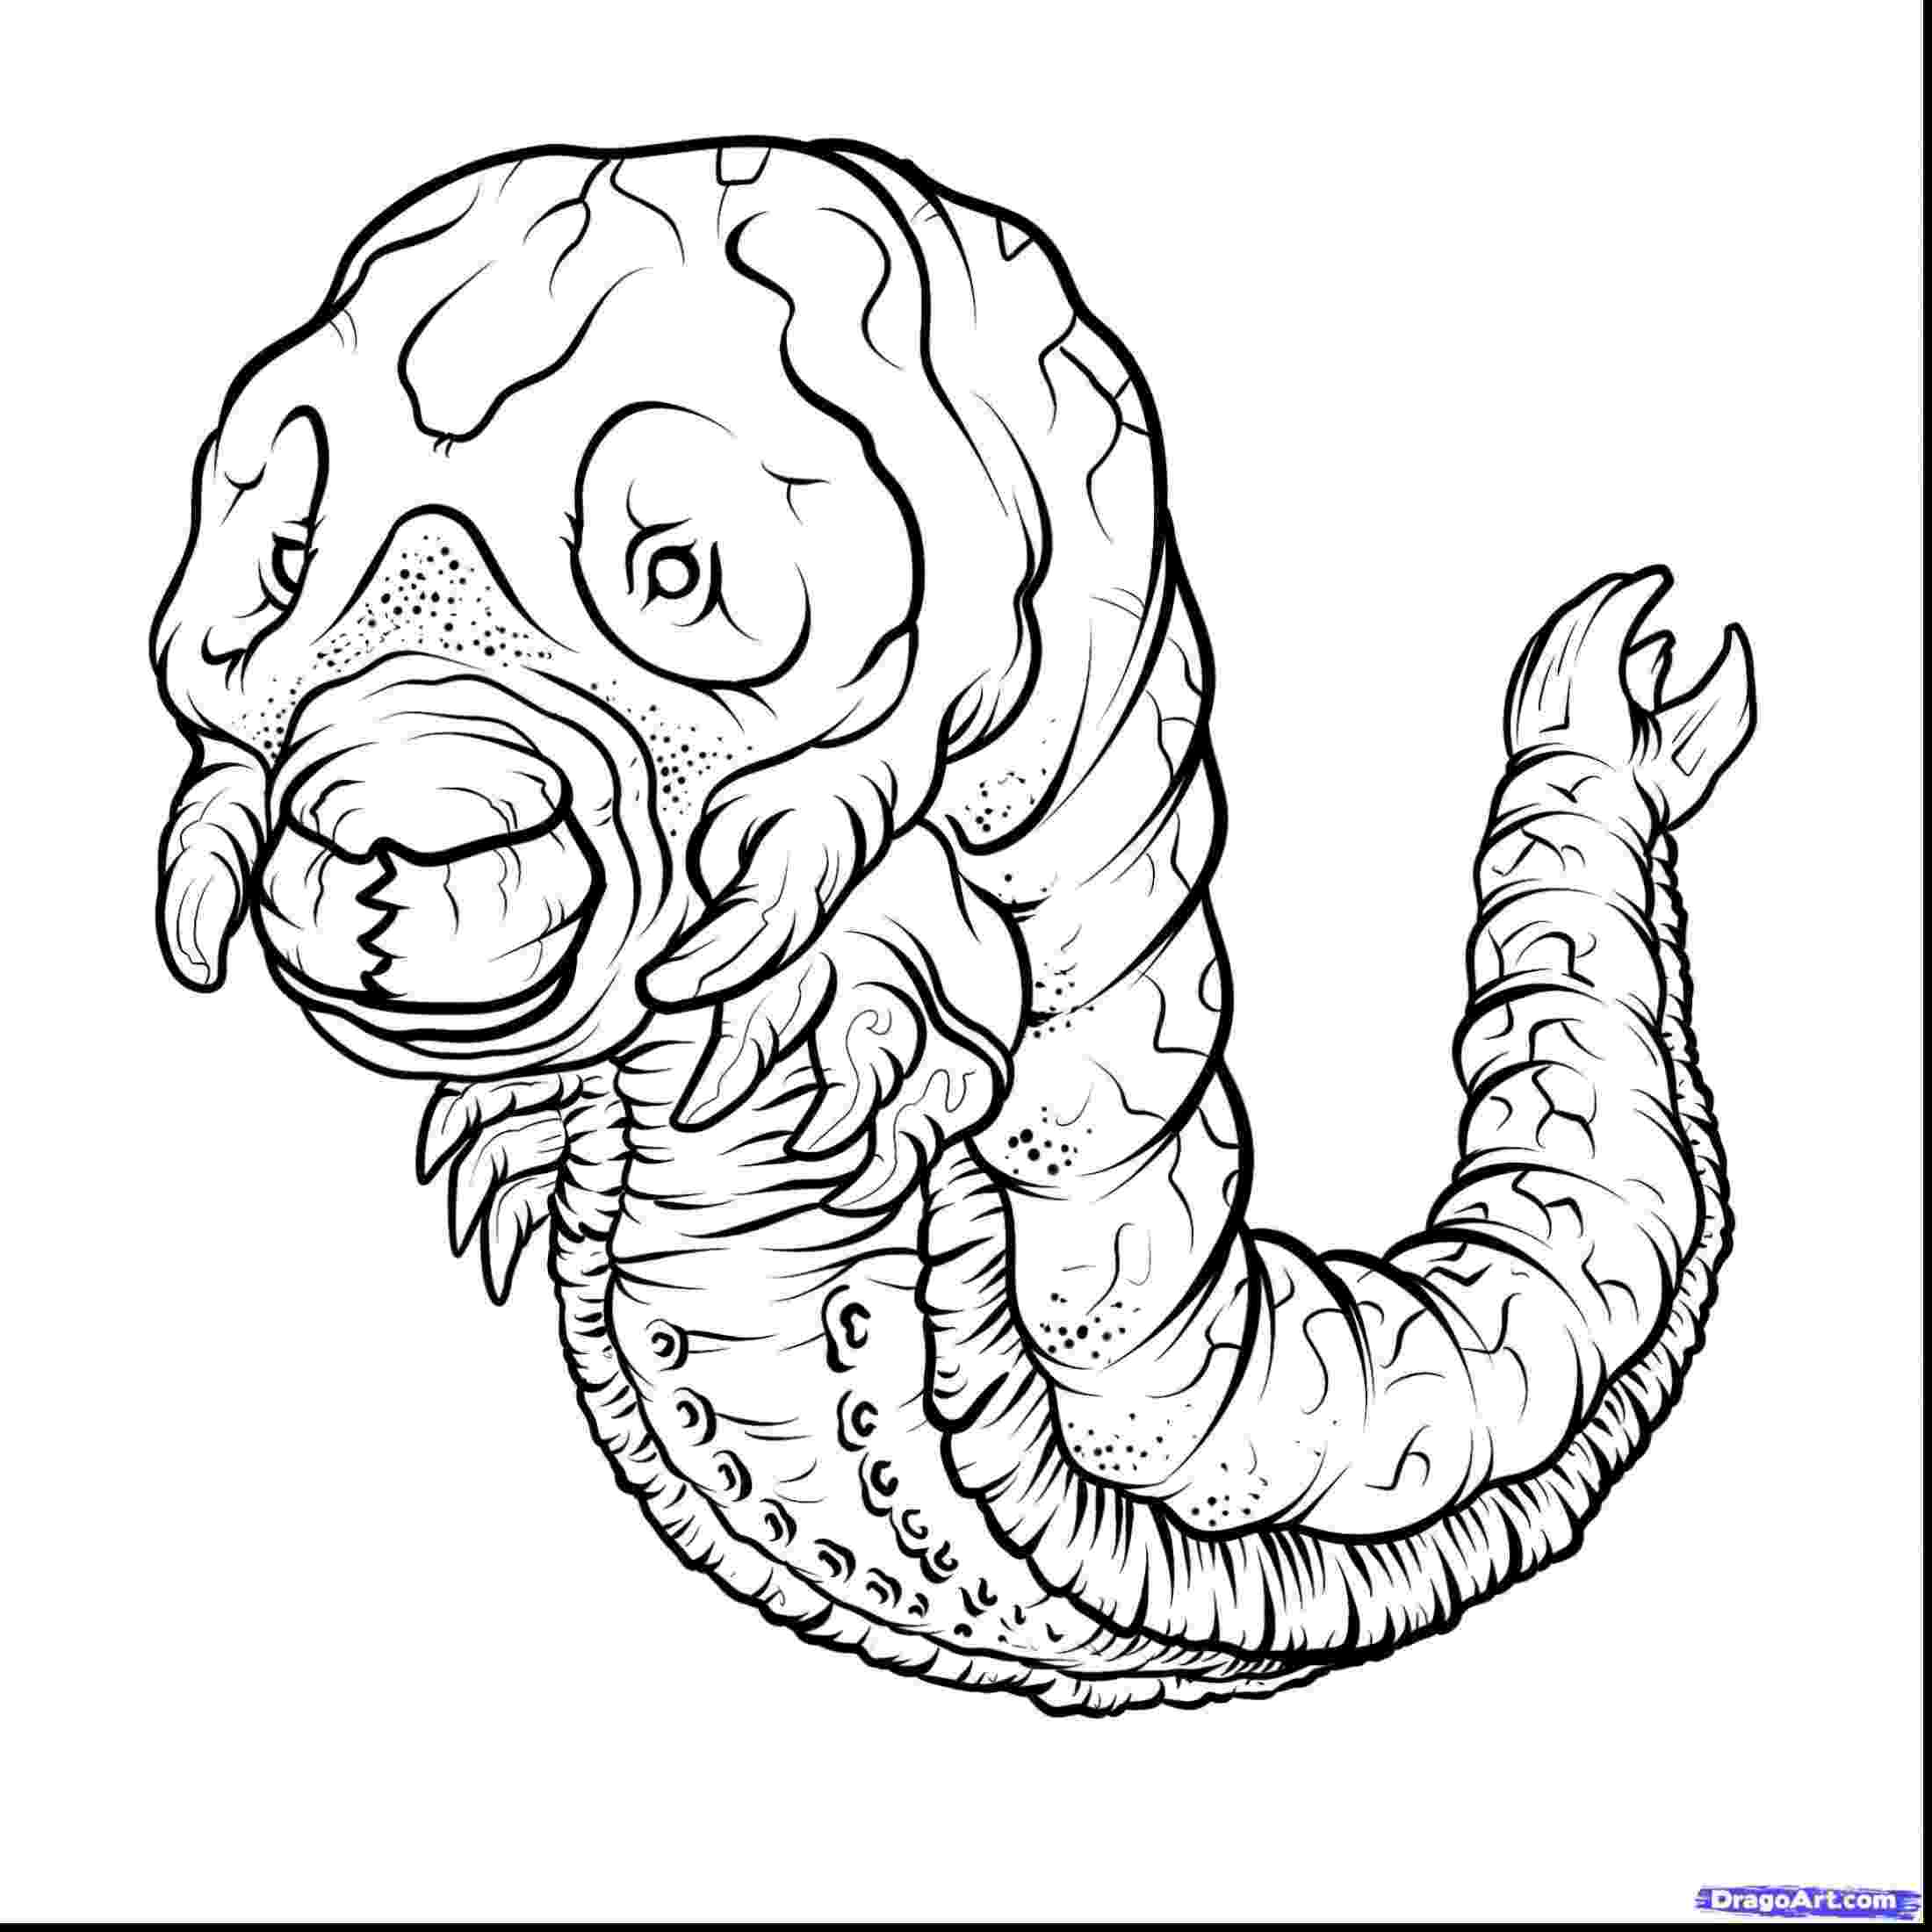 godzilla pictures to print space godzilla coloring pages at getdrawings free download print pictures to godzilla 